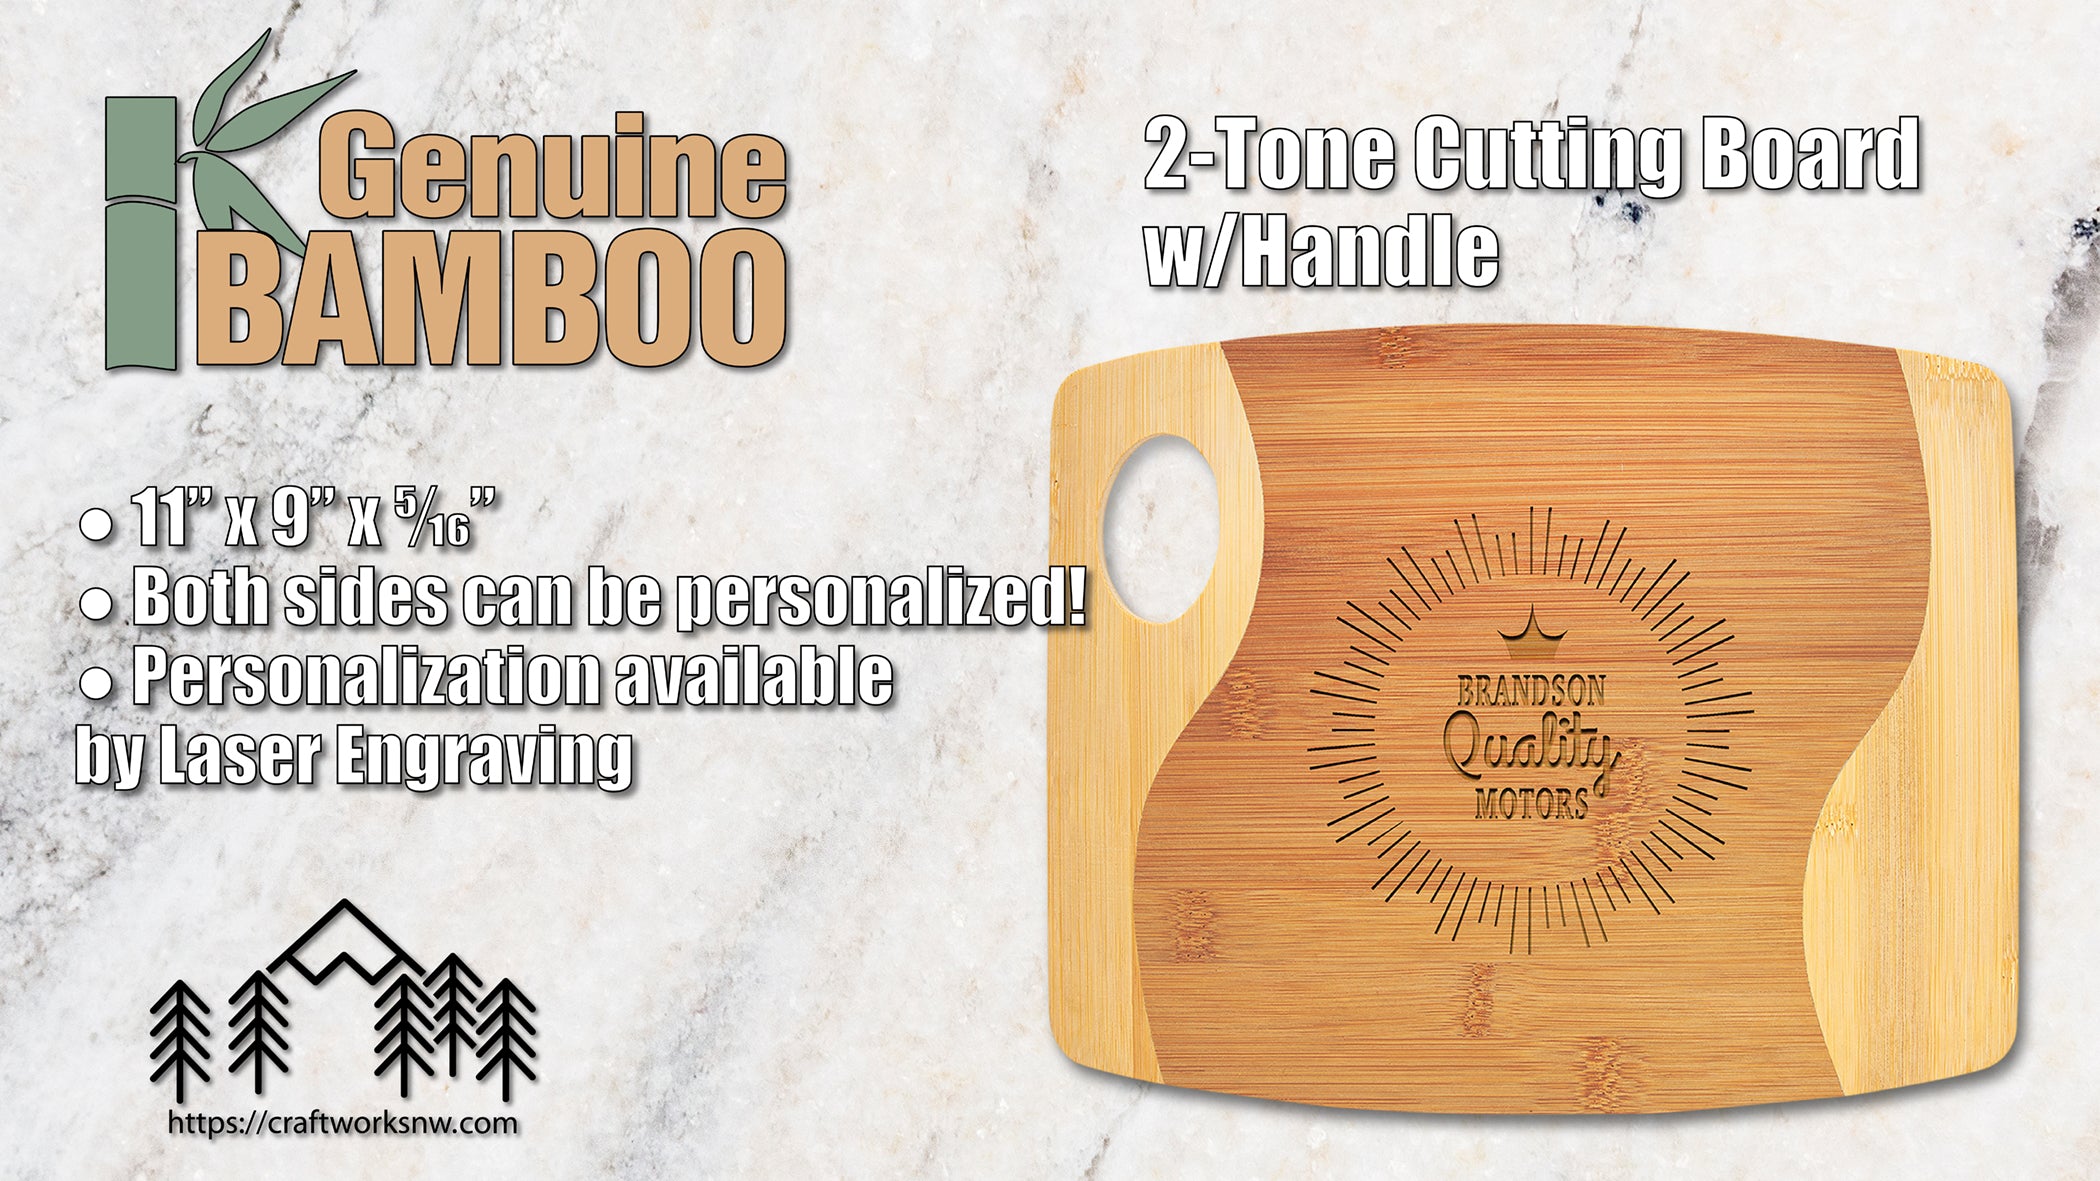 Two Tone Cutting Board w/Handle, Bamboo, 11" x 9", Laser Engraved - Craftworks NW, LLC